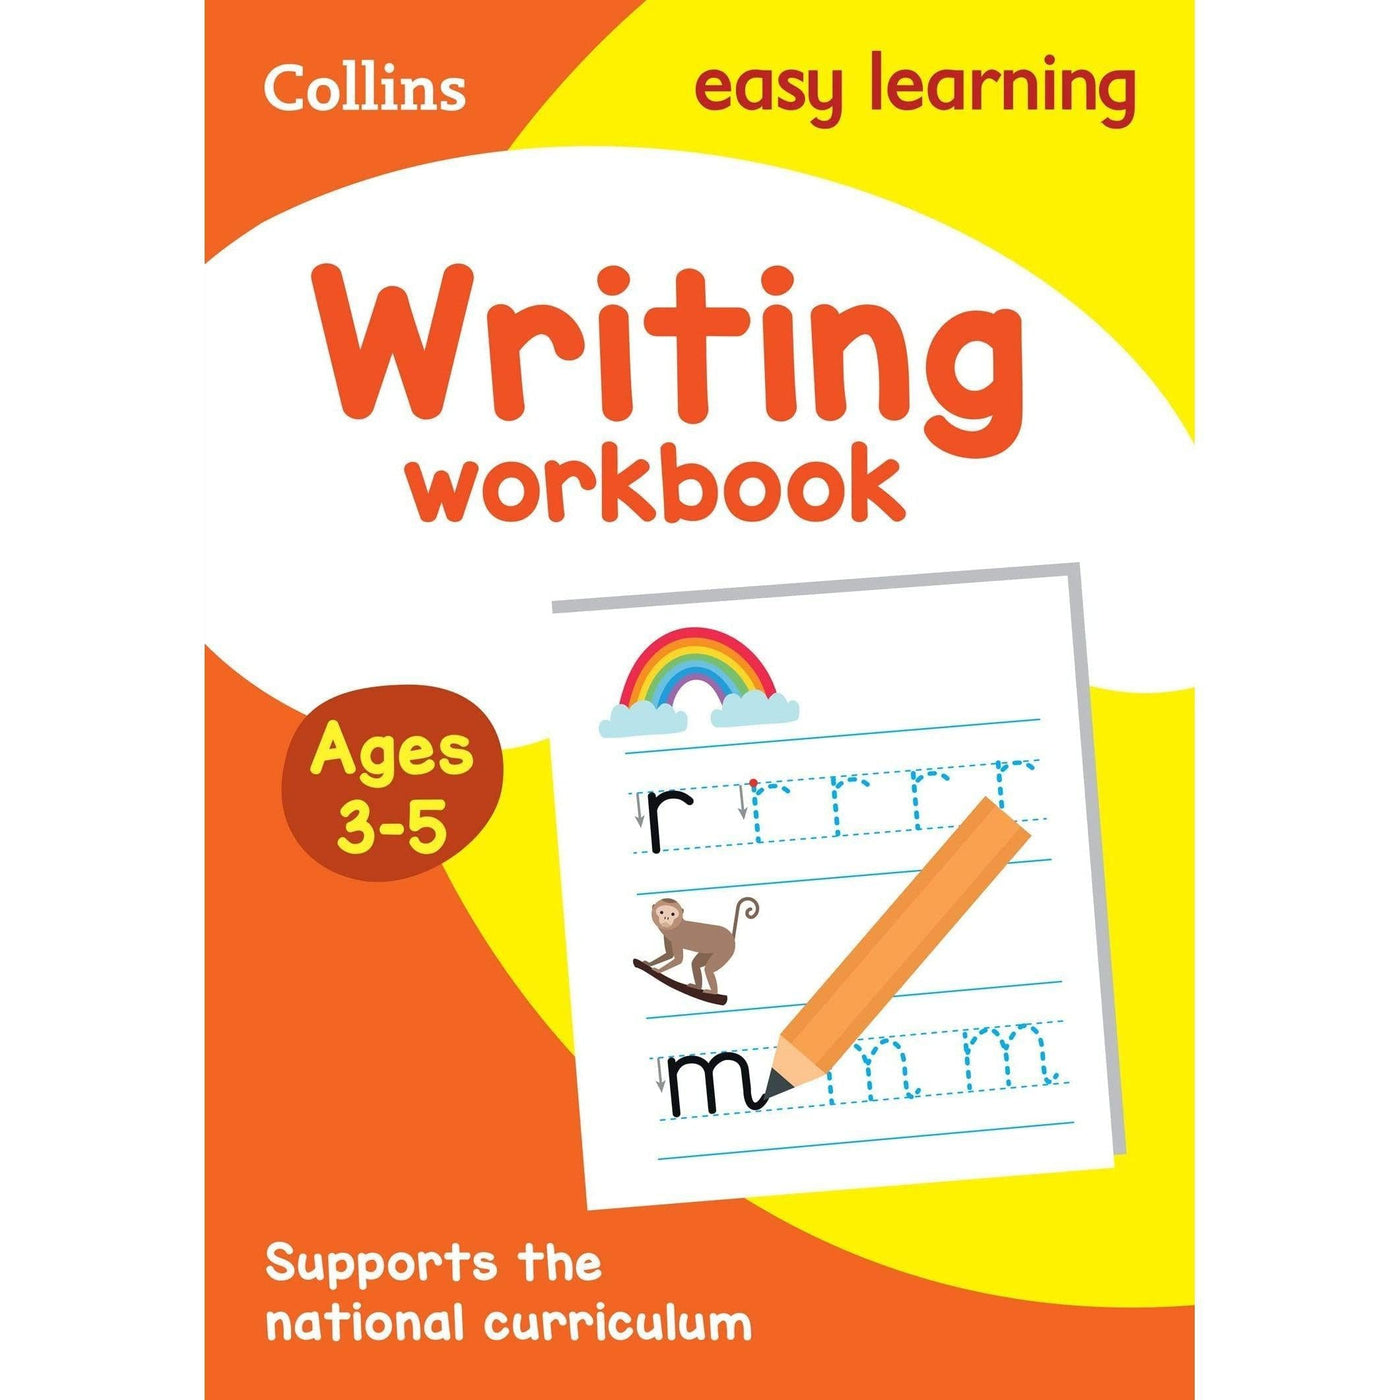 Writing Workbook Ages 3-5: Prepare For Preschool With Easy Home Learning (Collins Easy Learning Preschool)